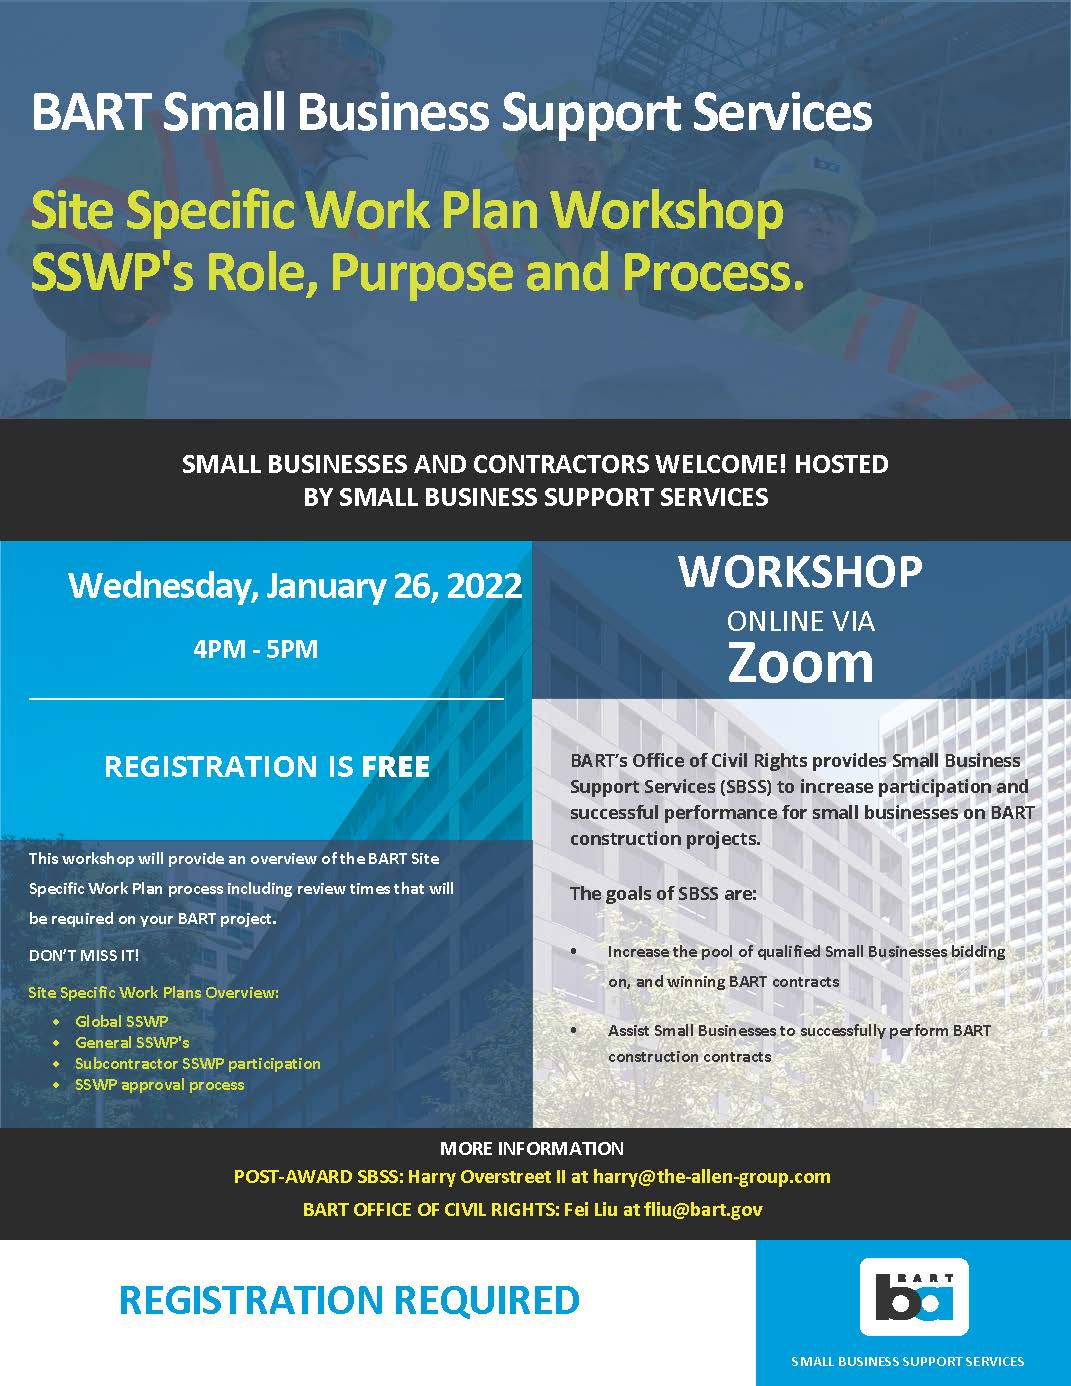 Small Business Support Services January 26, 2022 workshop